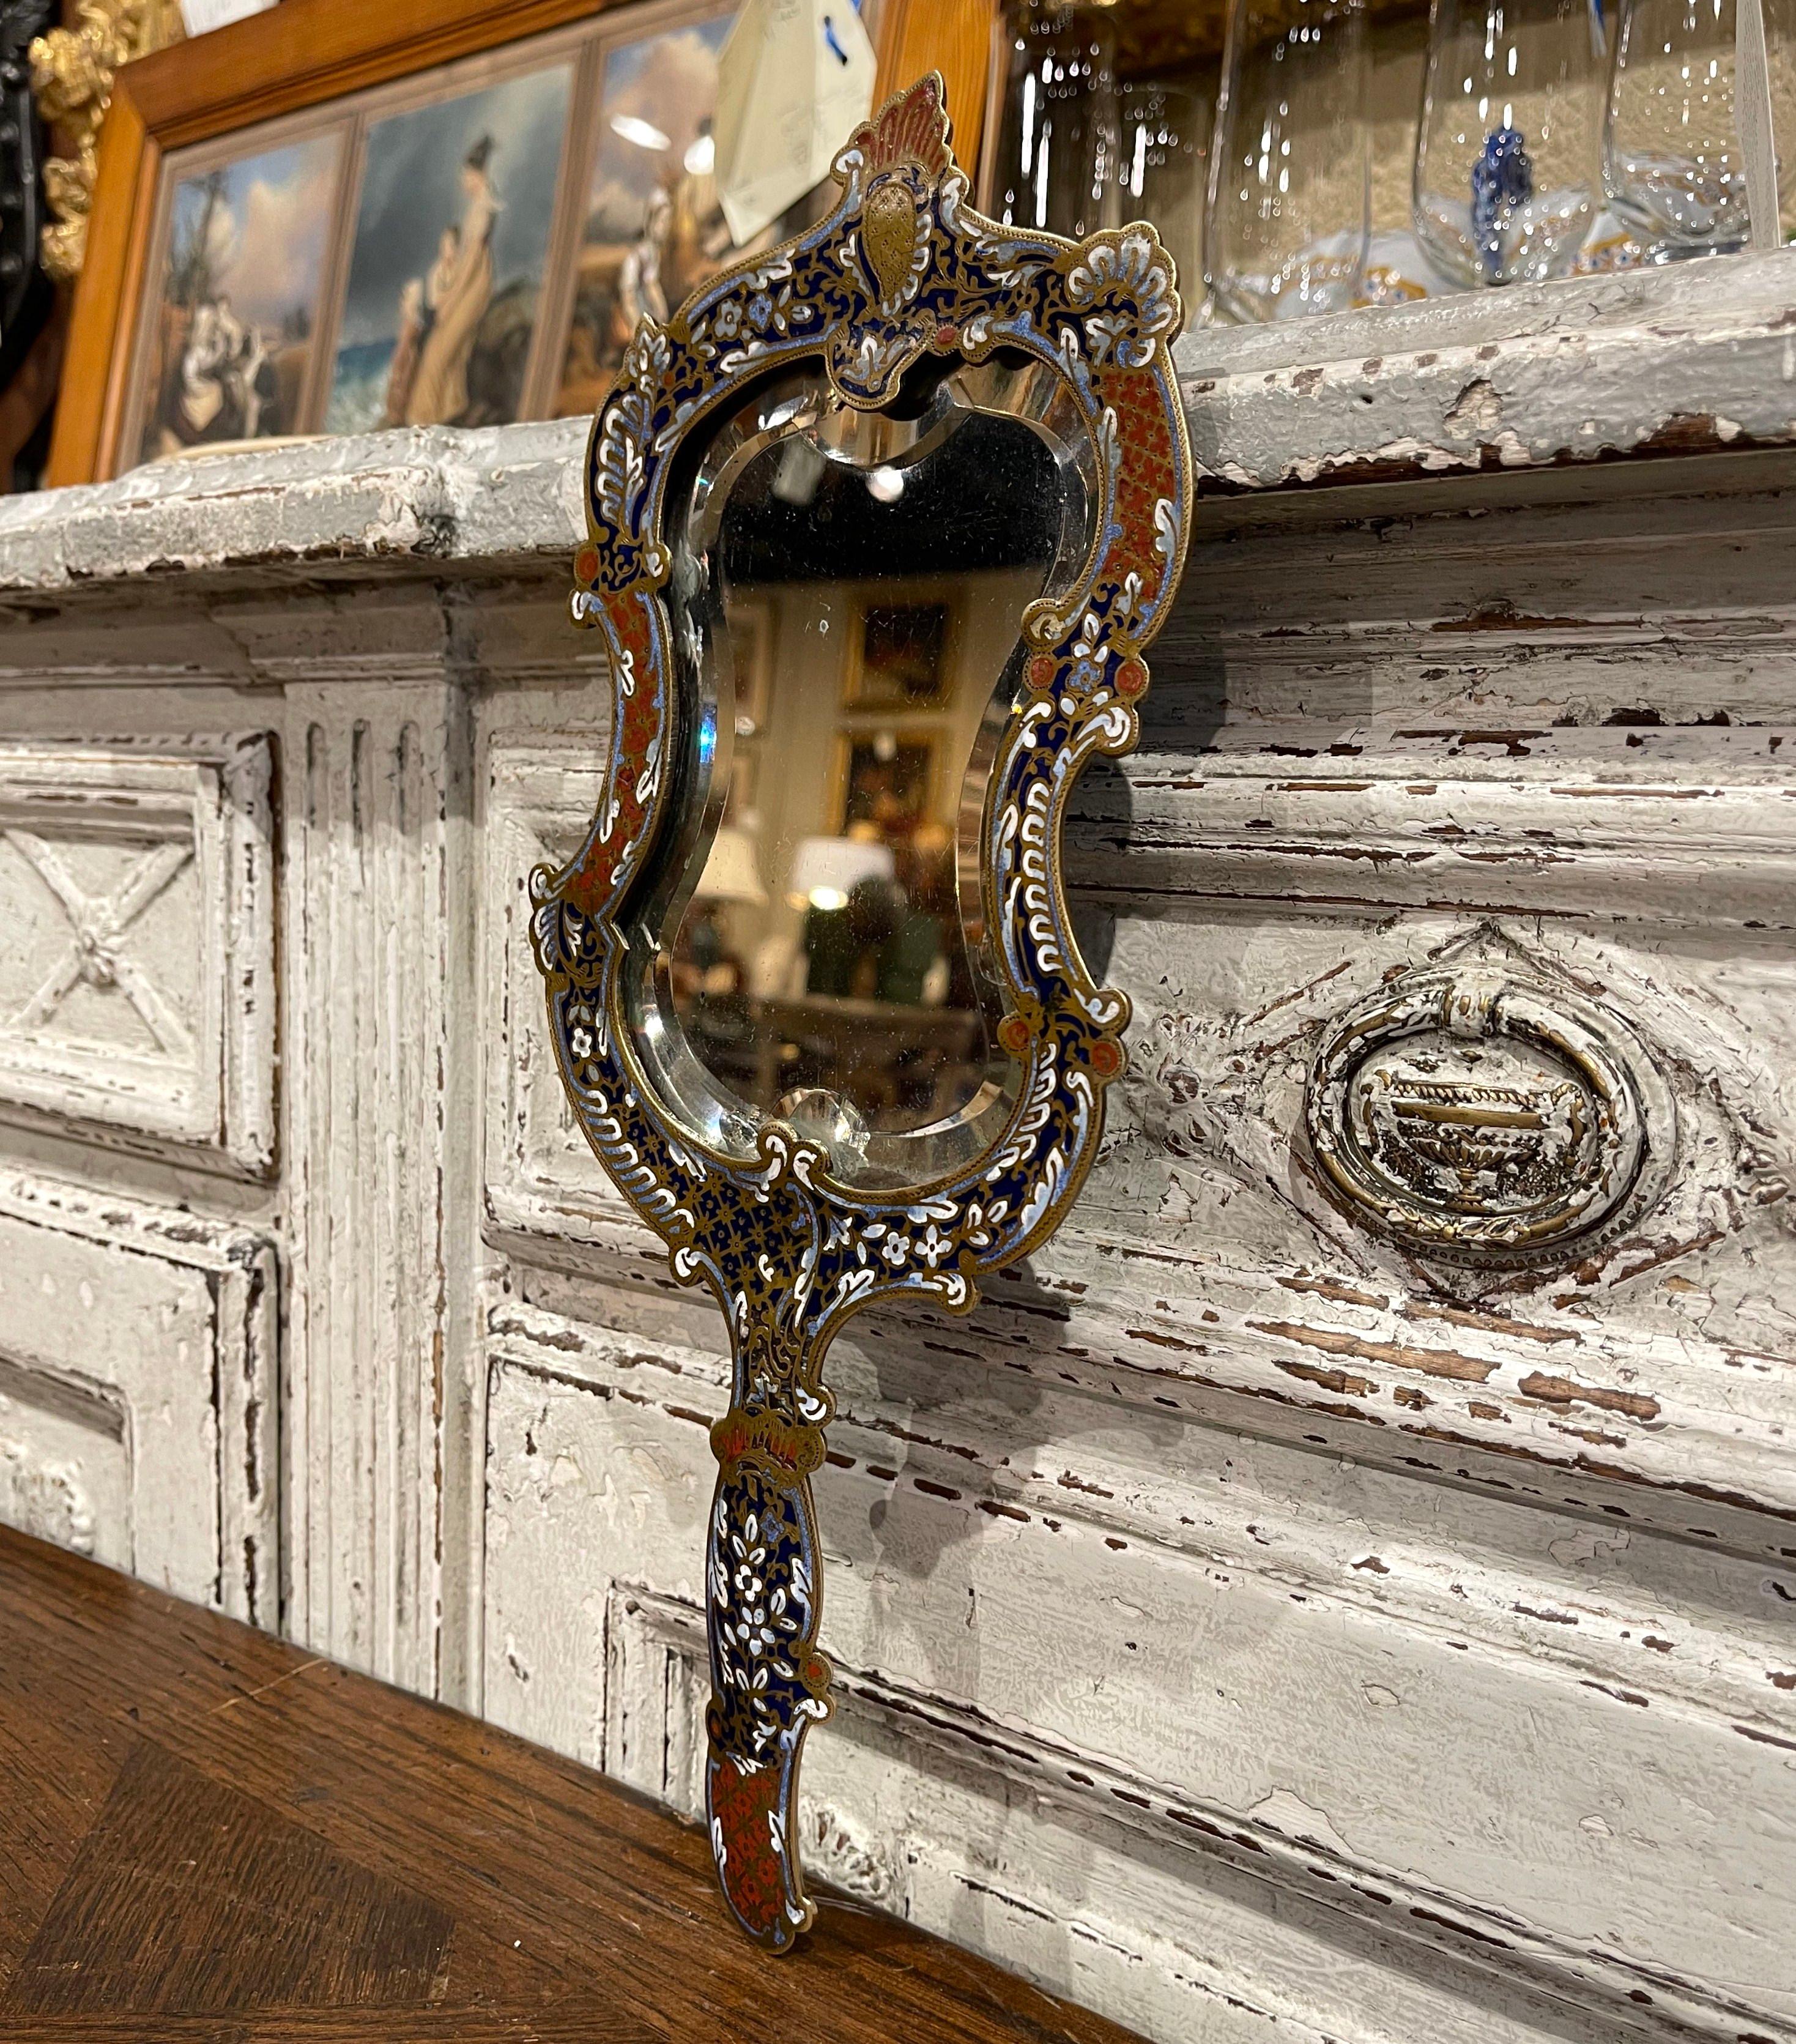 Crafted in France circa 1870, the colorful antique Louis XV hand mirror features elegant and intricate cloisonné decor throughout; it is further dressed with an inset beveled glass. The decorative vanity mirror is in excellent condition with bright